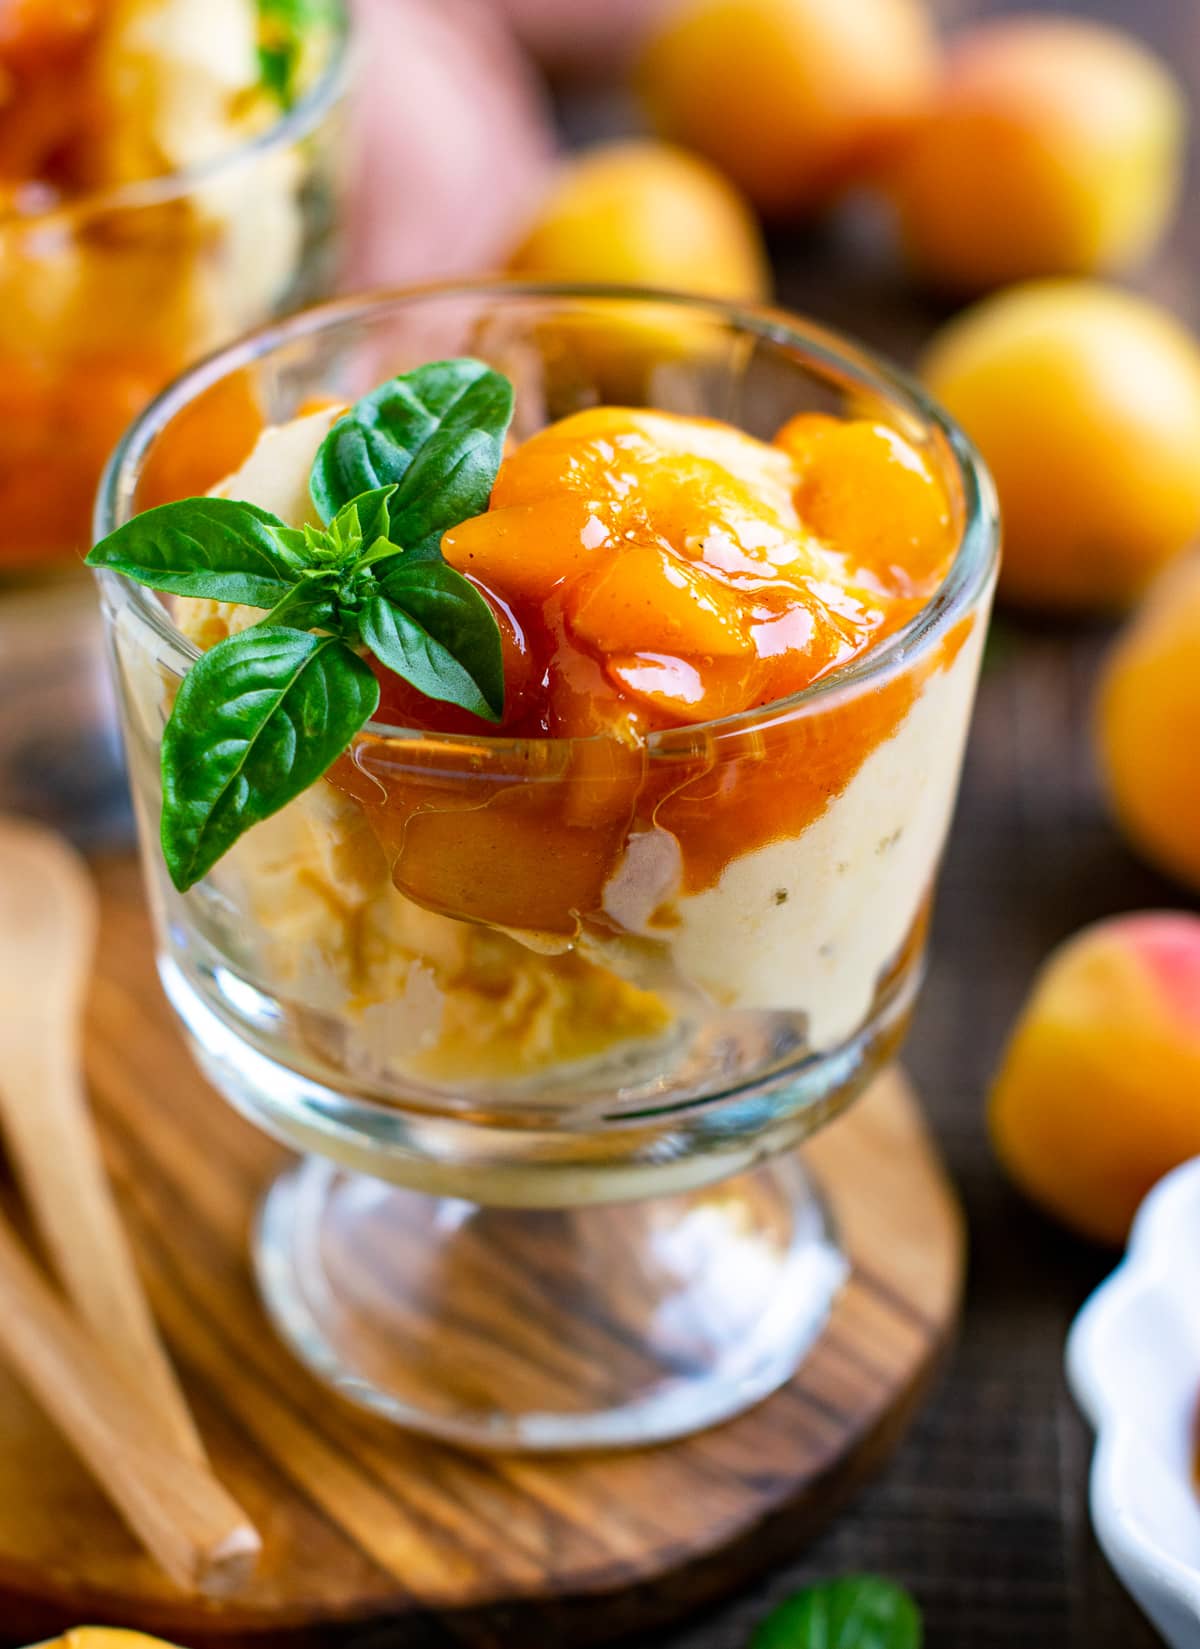 Homemade apricot ice cream served in a cup with basil